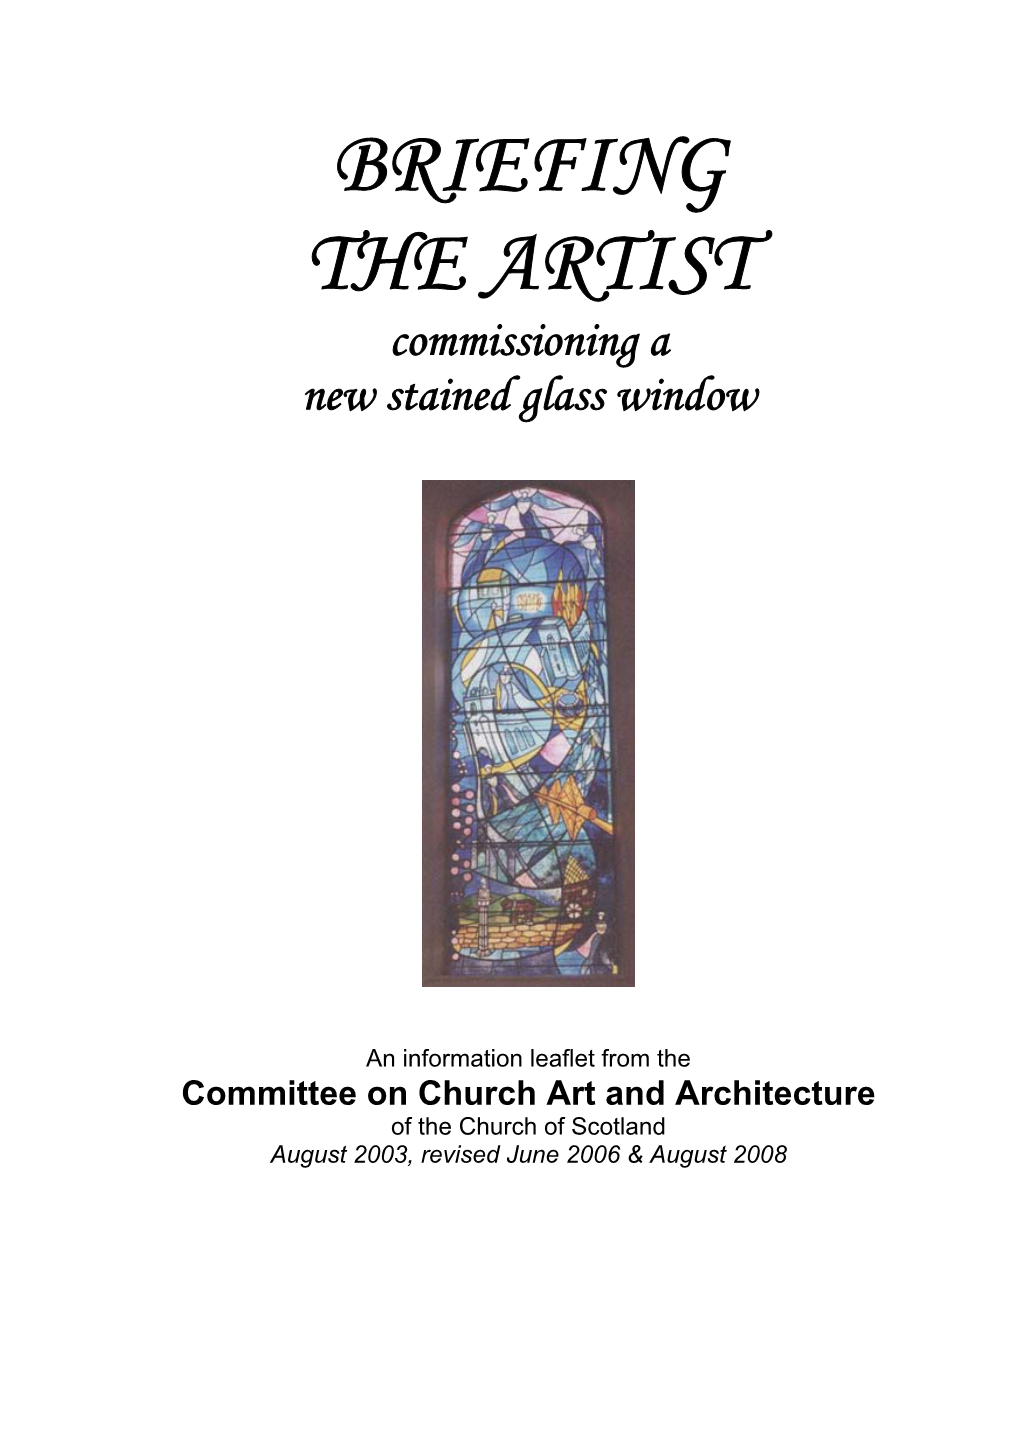 Briefing the Artist: Commissioning a New Stained